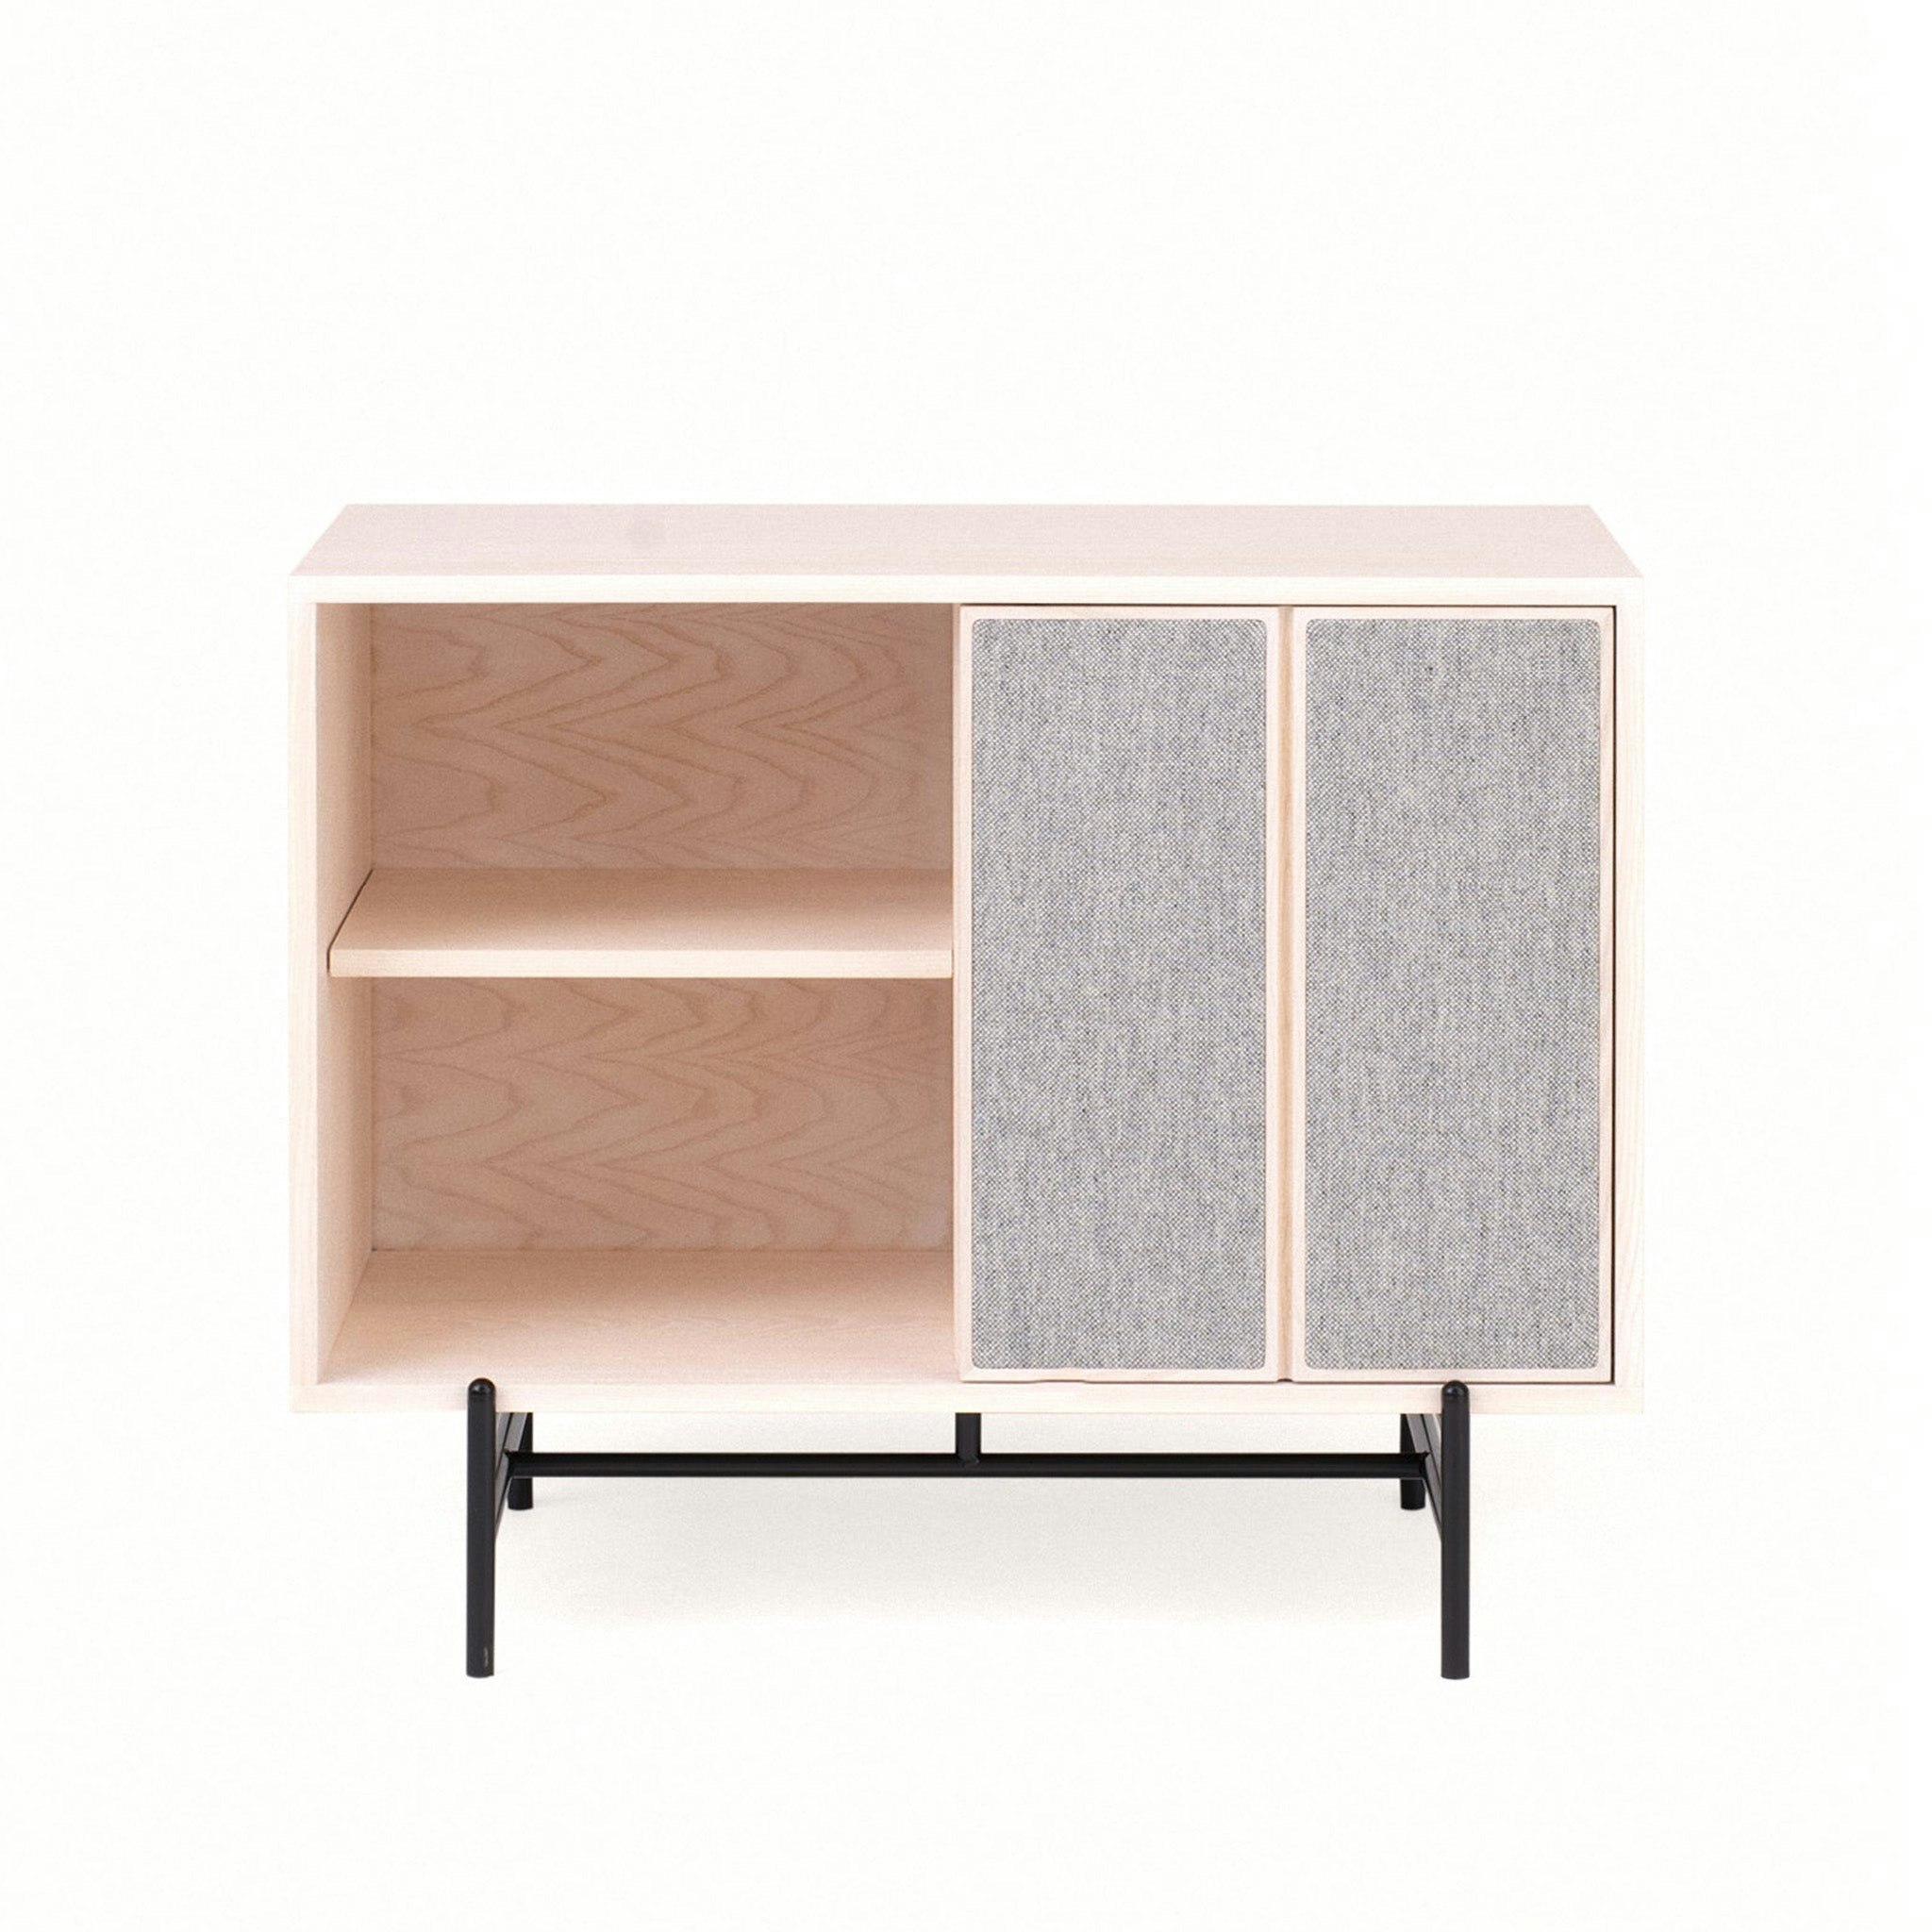 Clearance Canvas Cabinet - Small Off White / Hallingdal 116